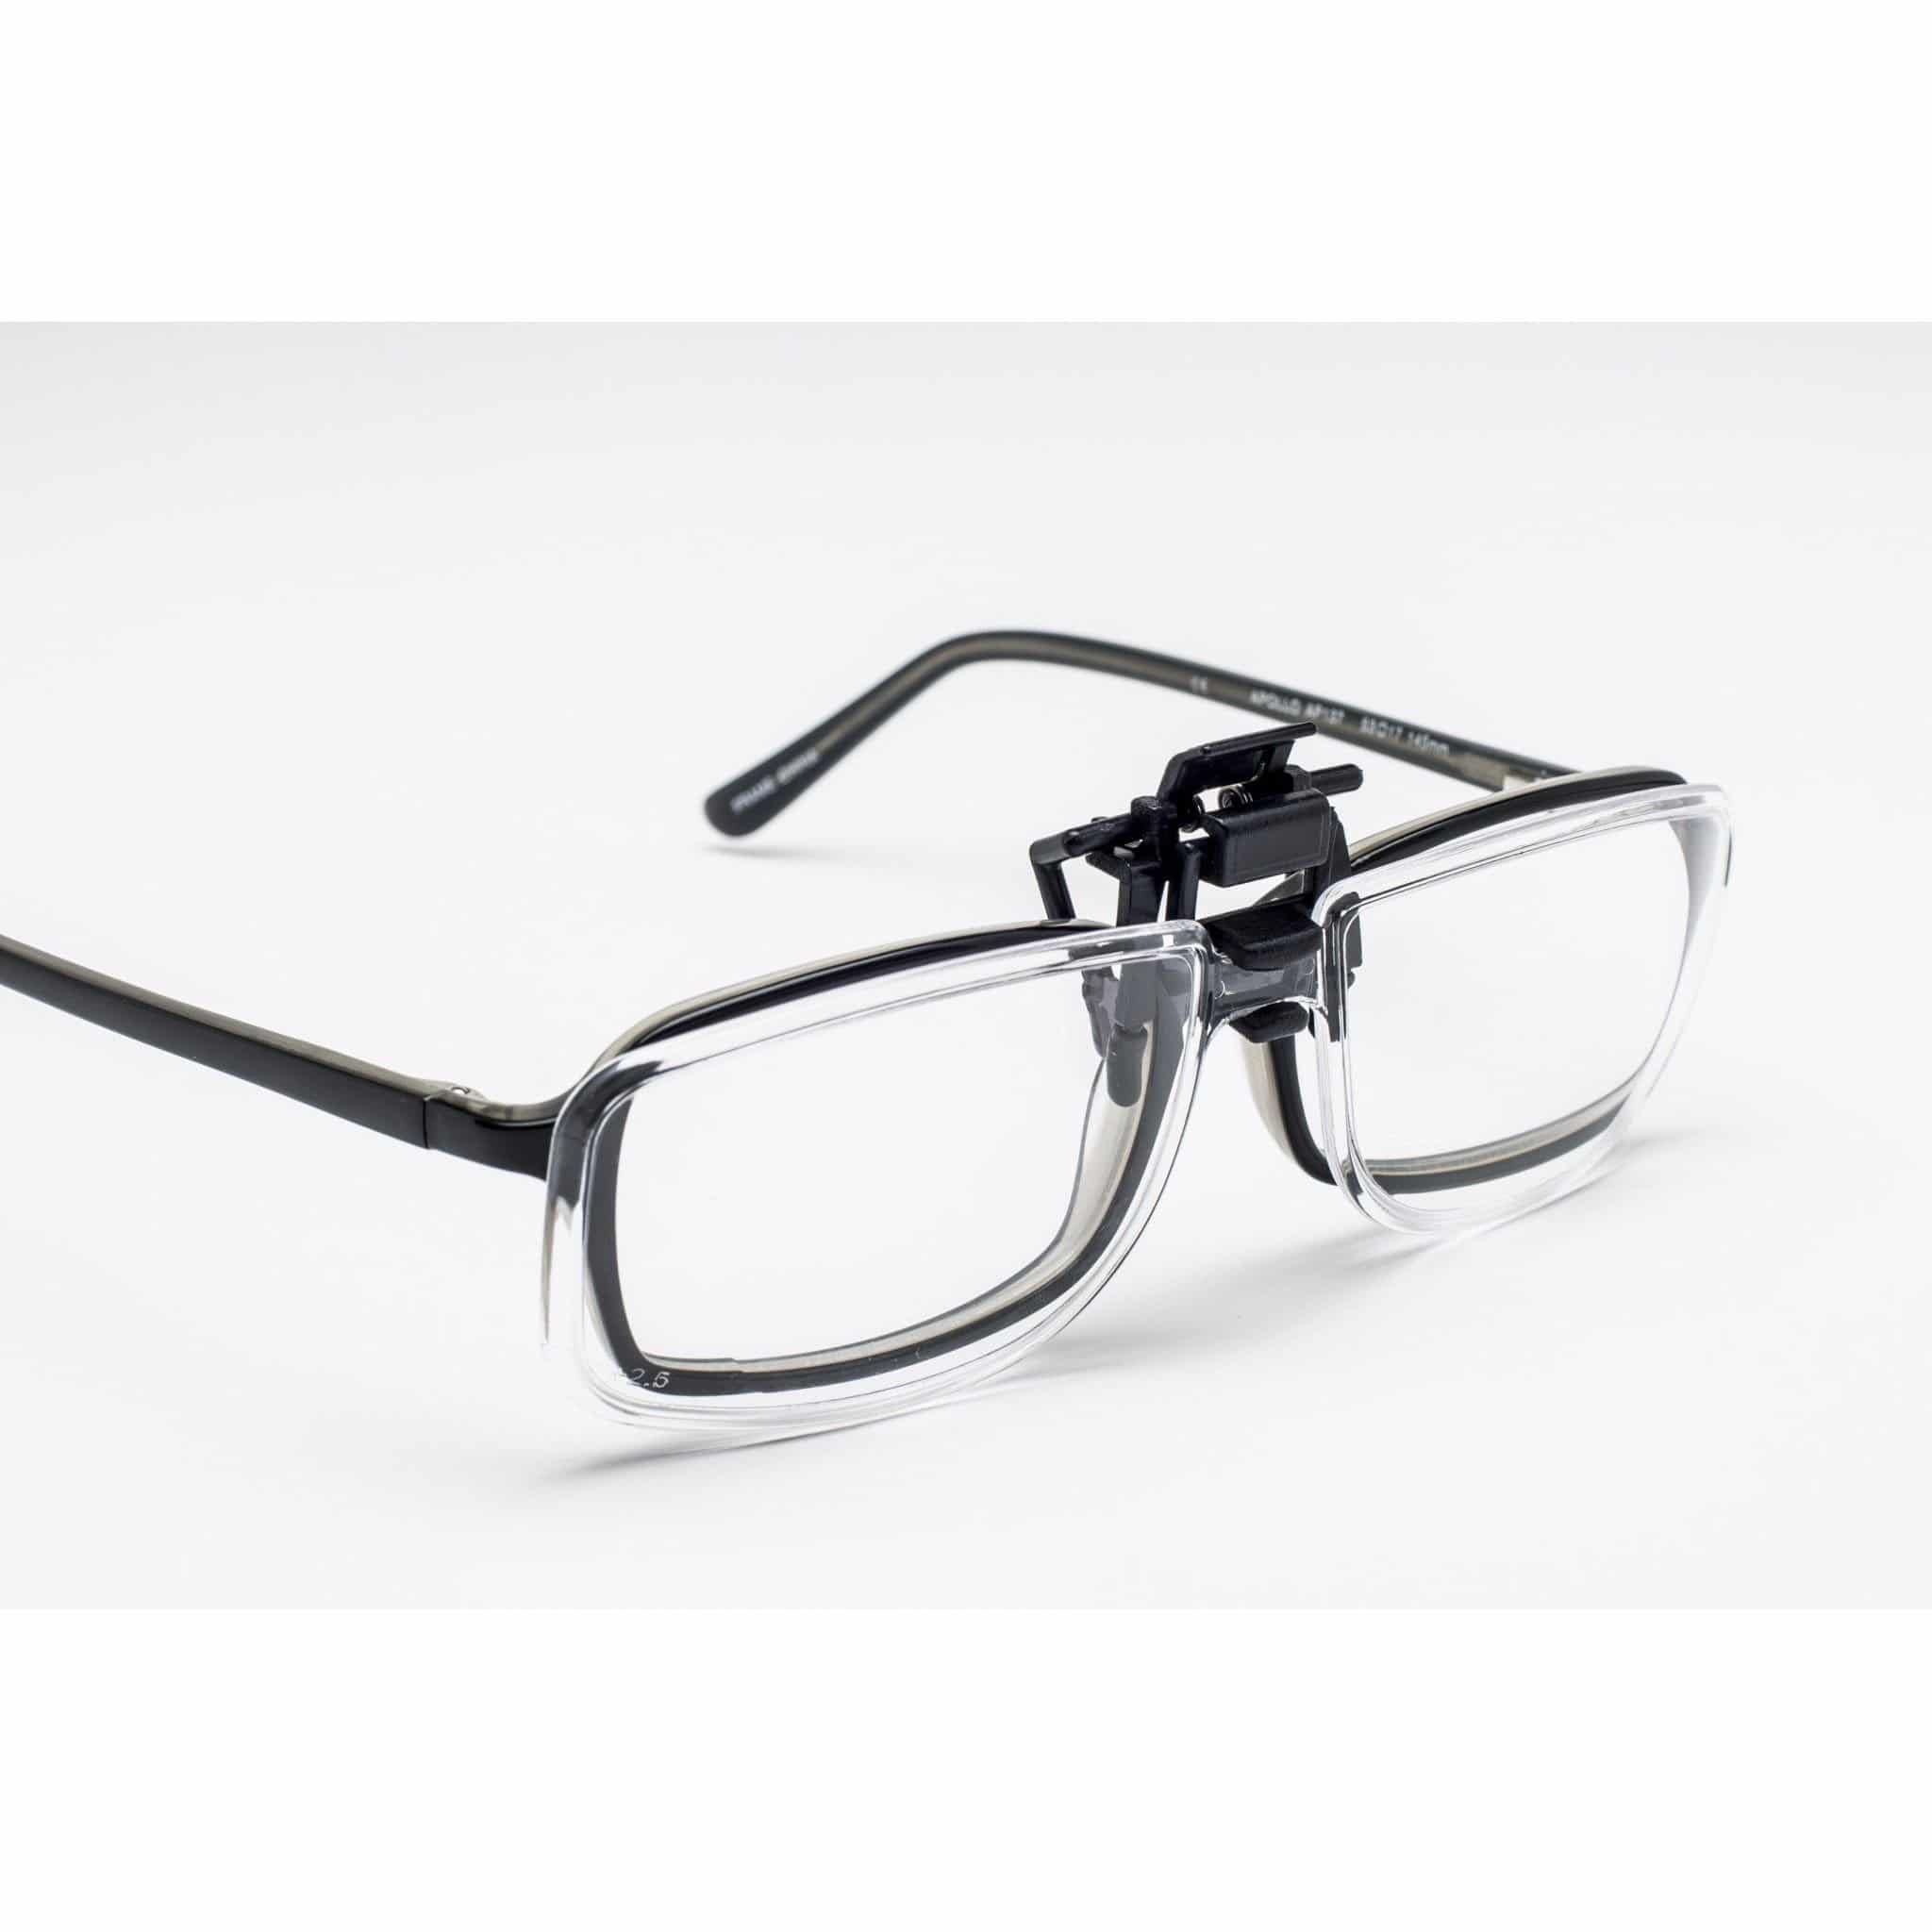 Clip-On Magnifiers - Safety Protection Glasses